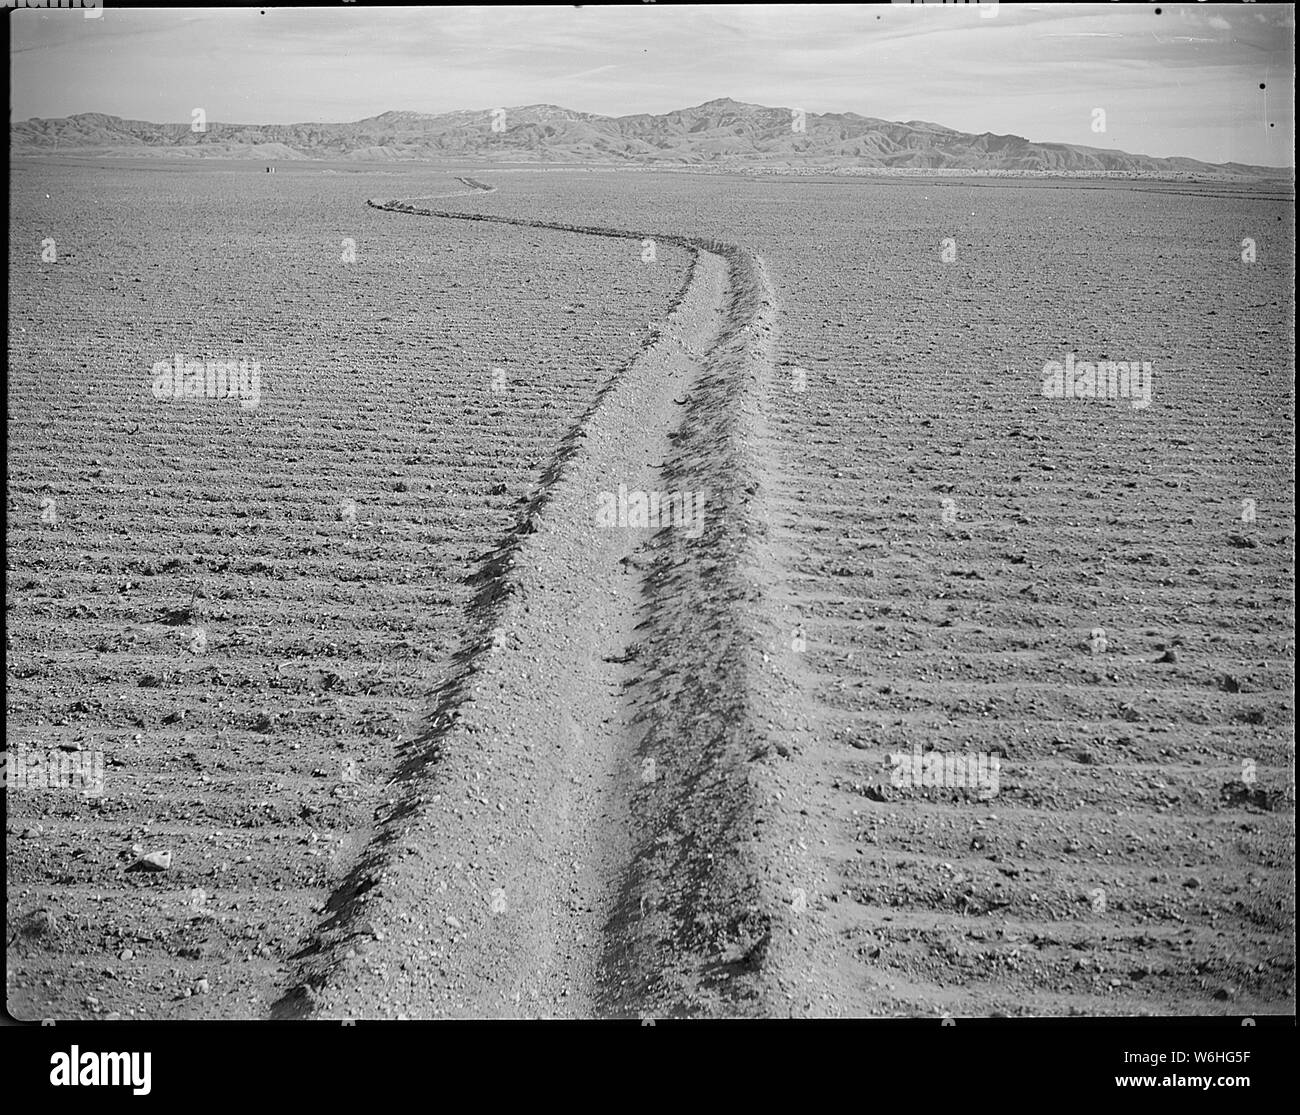 Heart Mountain Relocation Center, Heart Mountain, Wyoming. Land cleared and planted to grain crops. . . .; Scope and content:  The full caption for this photograph reads: Heart Mountain Relocation Center, Heart Mountain, Wyoming. Land cleared and planted to grain crops. This picture shows the contoured irrigation system which is practiced by the Heart Mountain Agriculture Section. This method of irrigation prevents soil erosion. Stock Photo